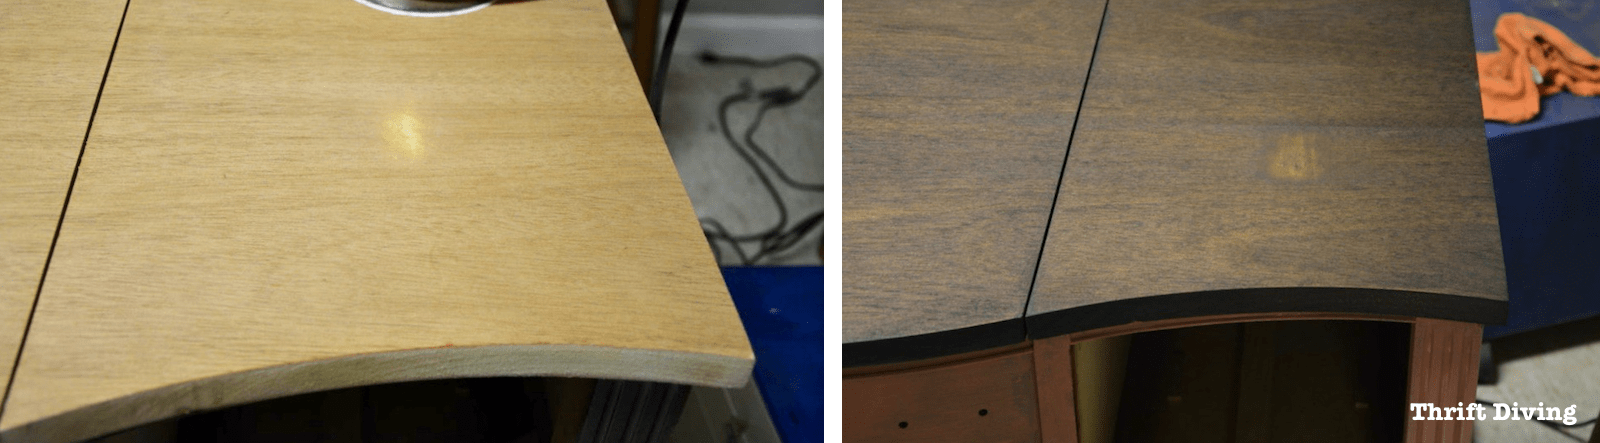 How to Strip Furniture and Stain Wood - Be careful when sanding wood with an orbital sander so you don't damage the wood. Everything You Wanted to Know About Furniture Stripping If You're a Newbie - Thrift Diving 